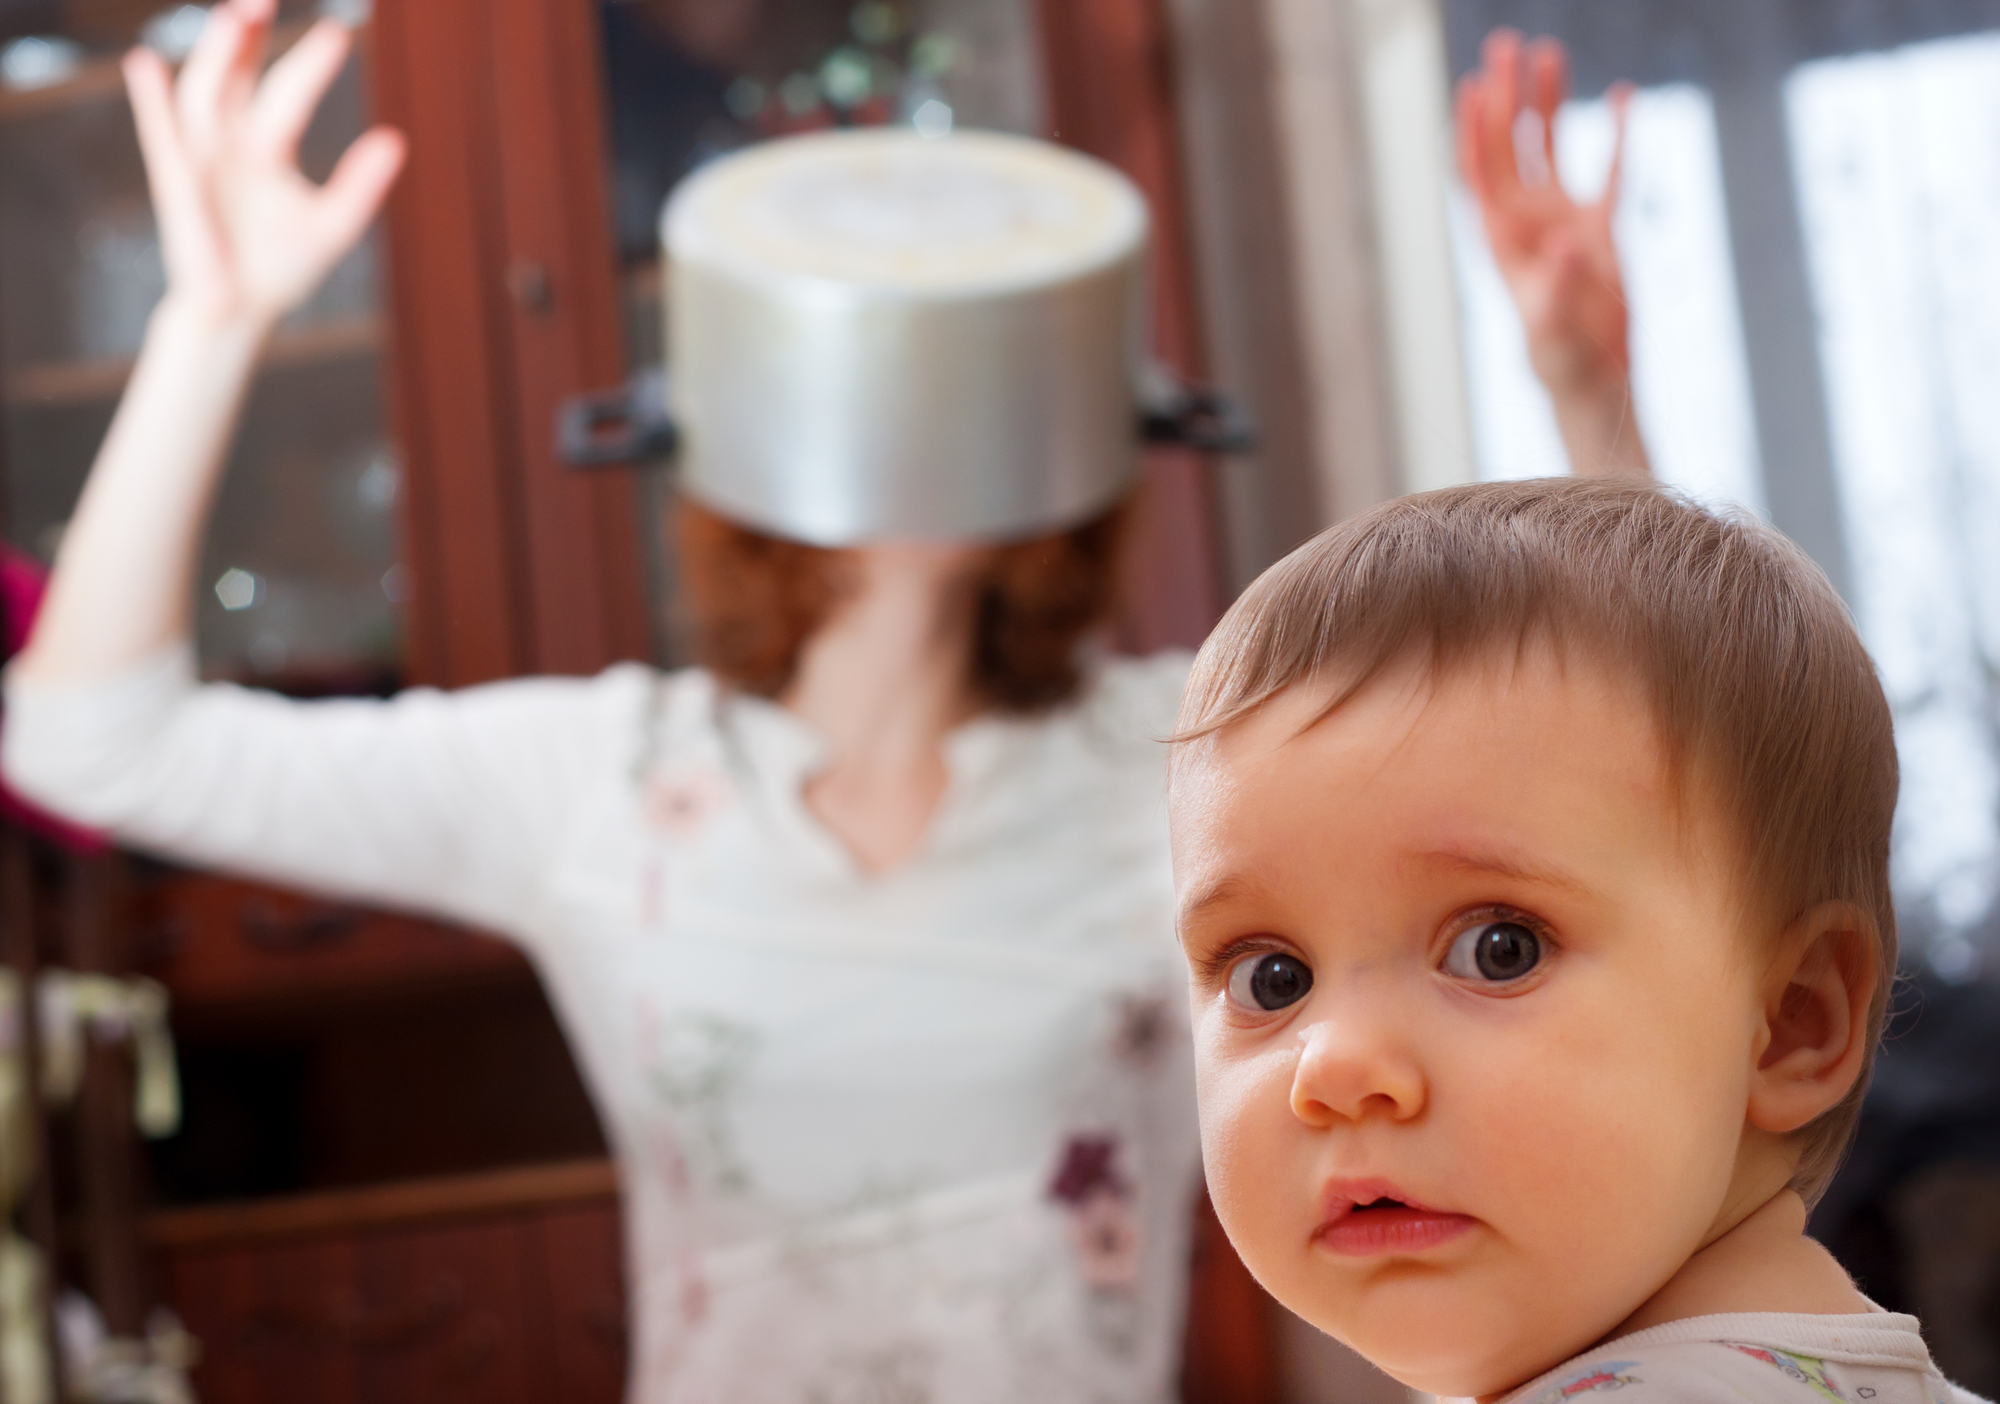 Portrait of scared baby against crazy mother with pan on head